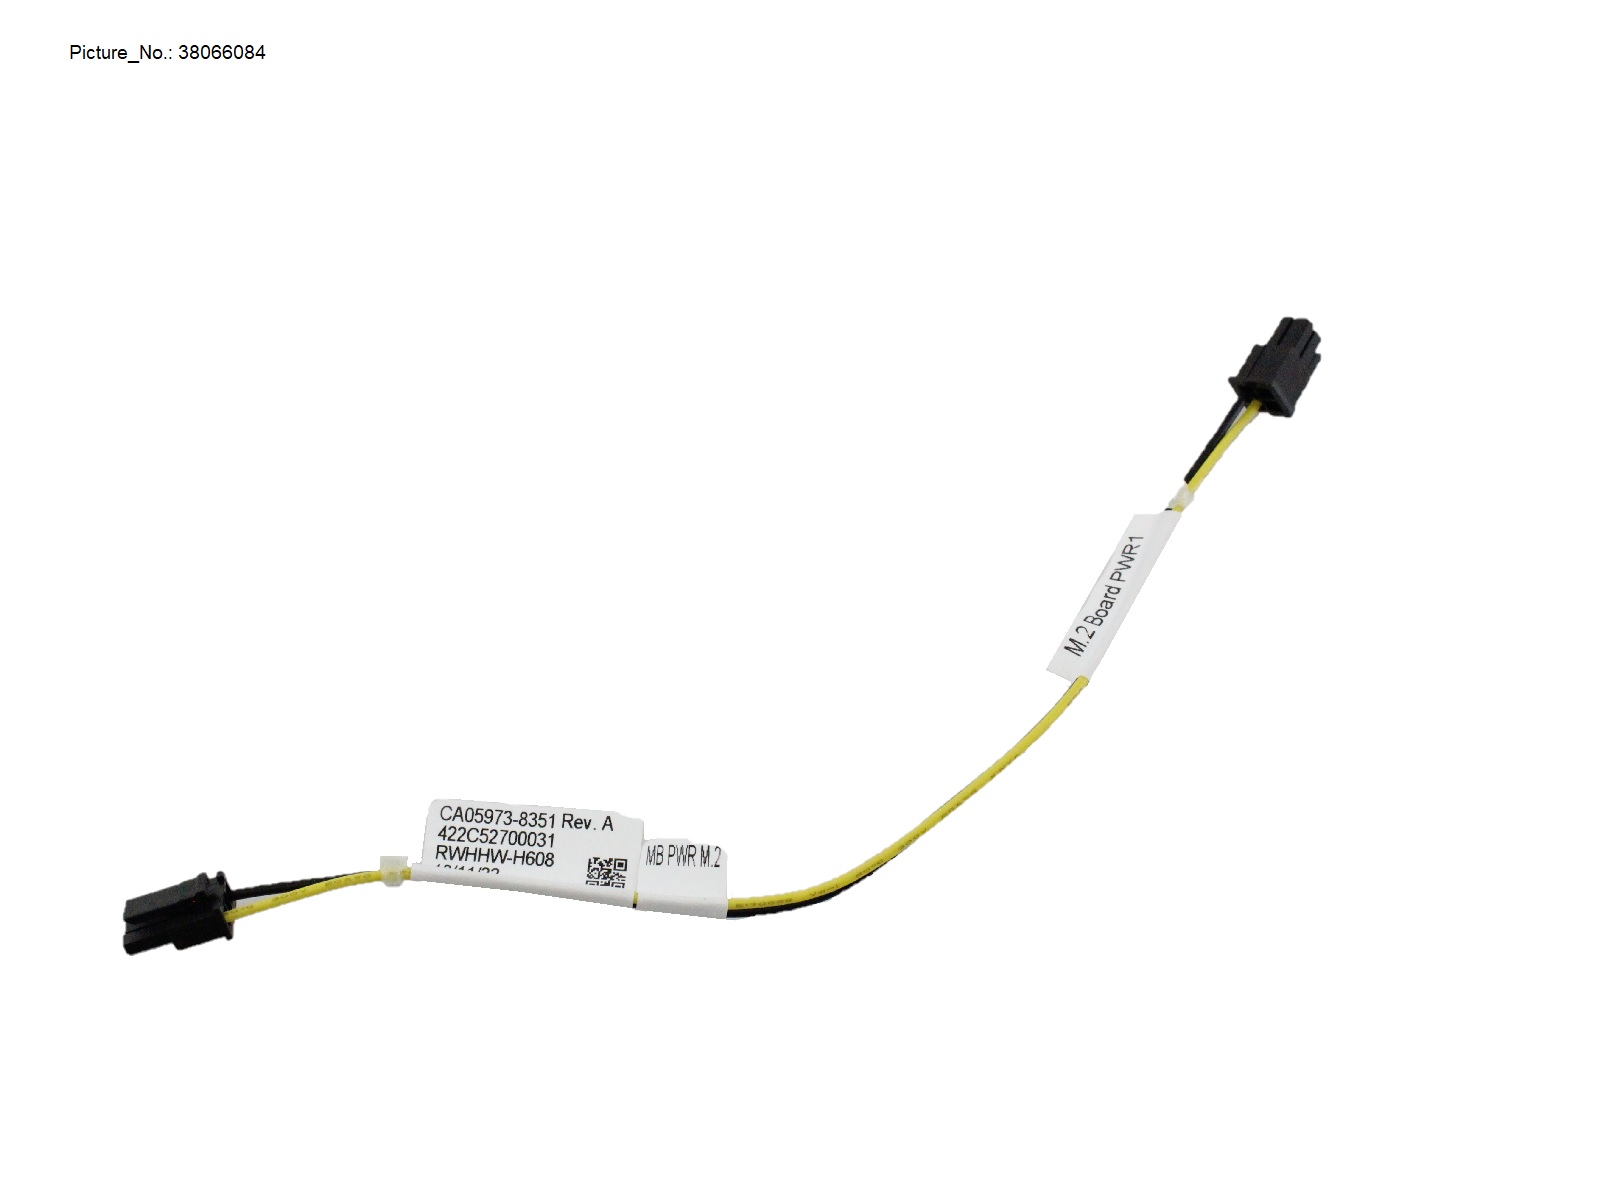 POWER CABLE 2X2 (MB TO M.2 BOARD)